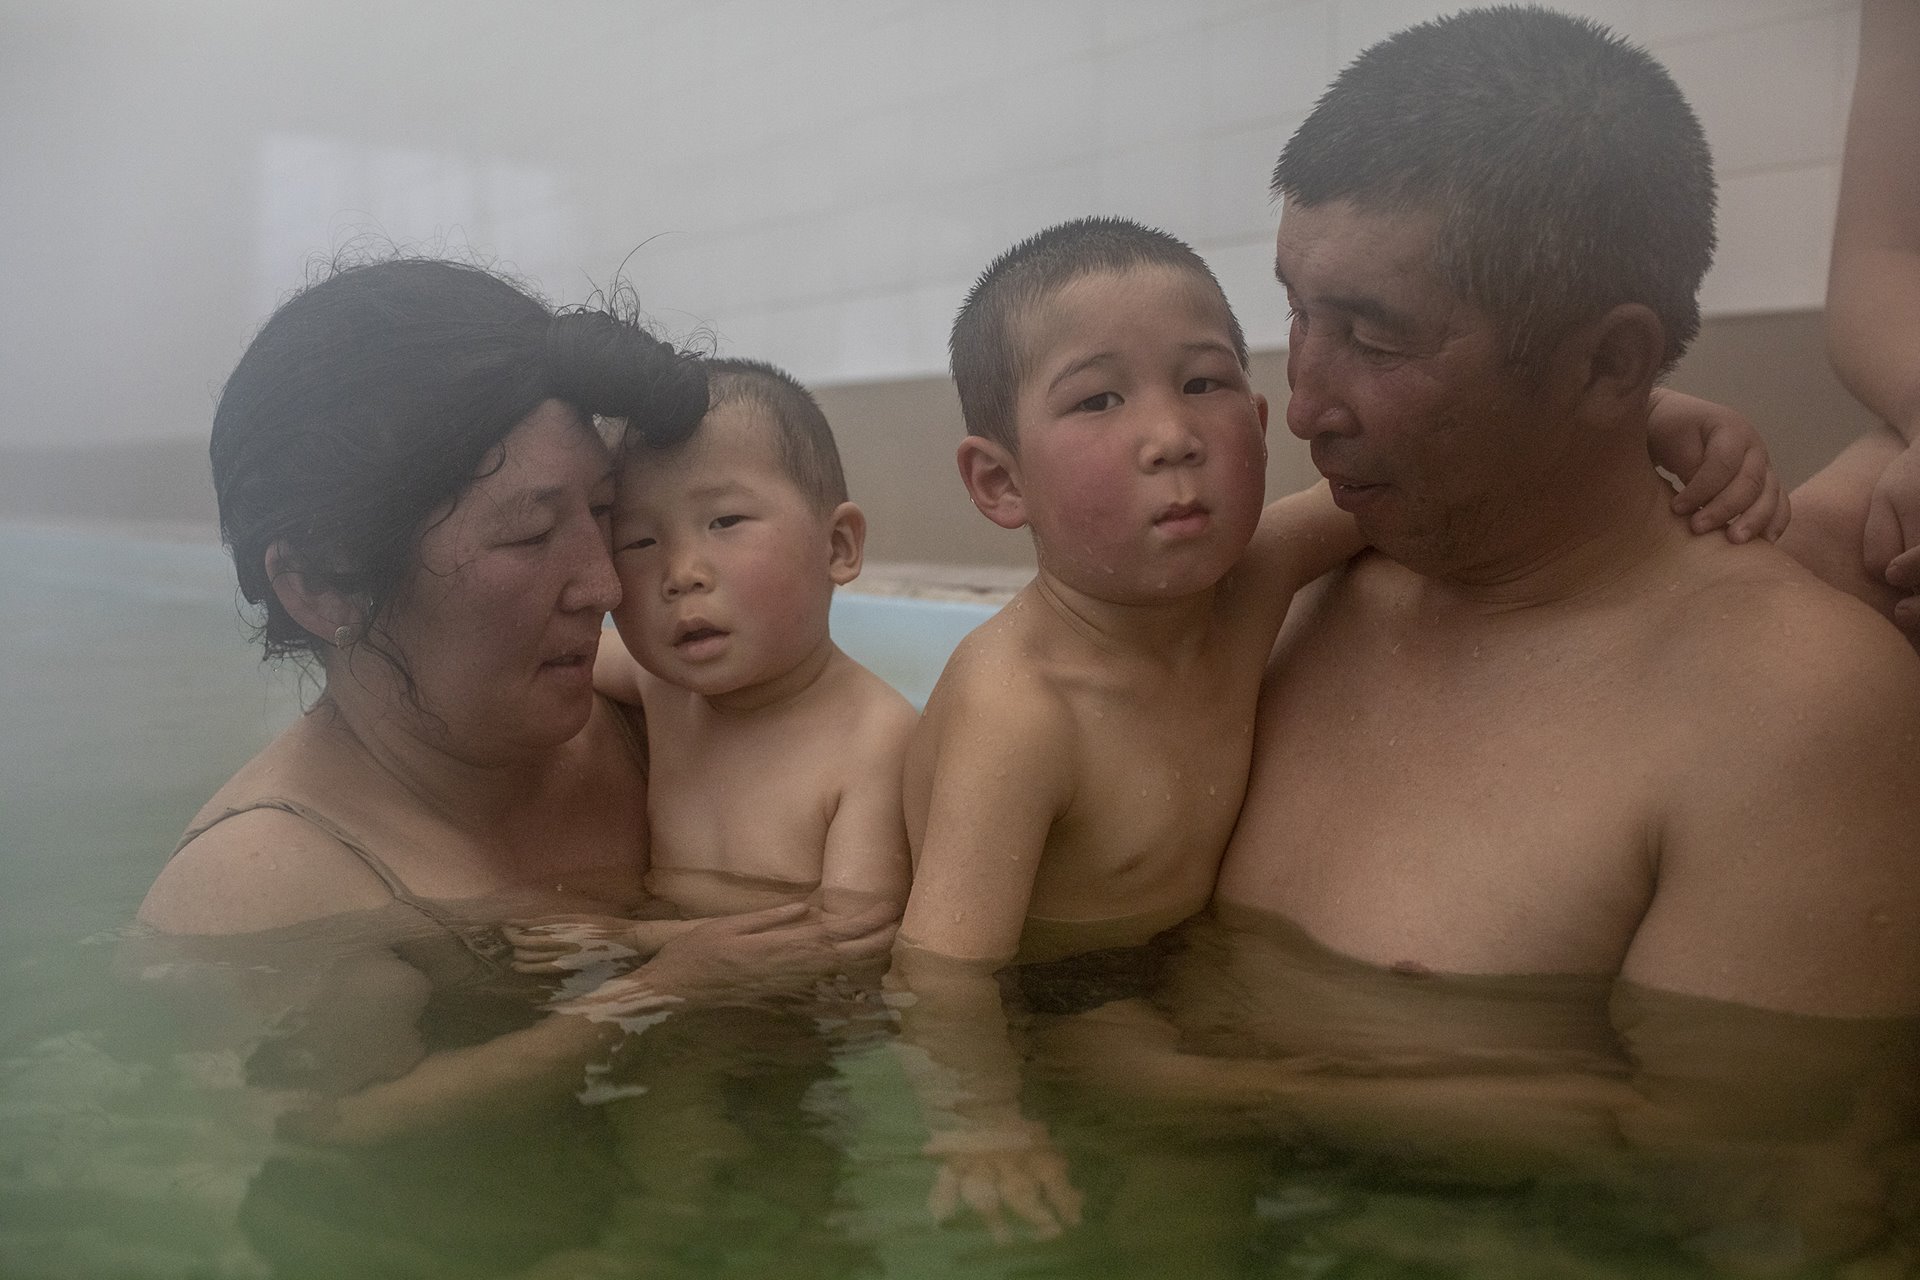 <p>Jaynagul Brjieva (37) and her family (from left to right) Adakhan (2), &nbsp;Alikhan (3), and Nurlan Bayduev (41) enjoy an outing to a hot spring in Kaji-Say, Kyrgyzstan. The waters are thought by some to have healing properties.</p>
